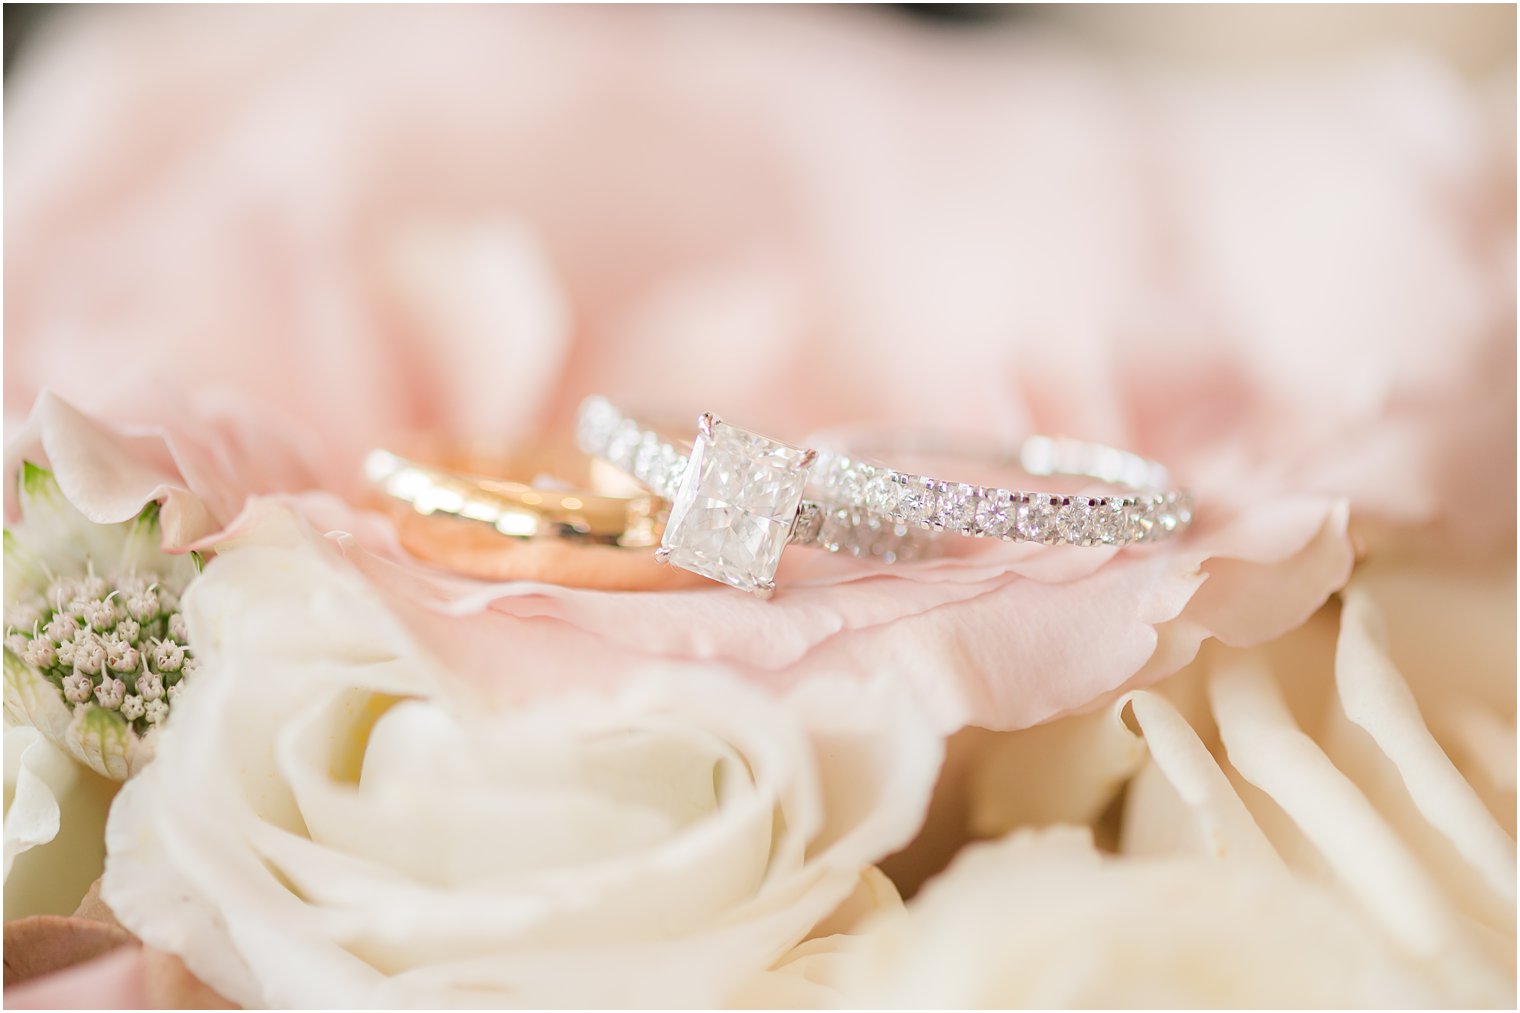 wedding rings rest on pink and ivory roses